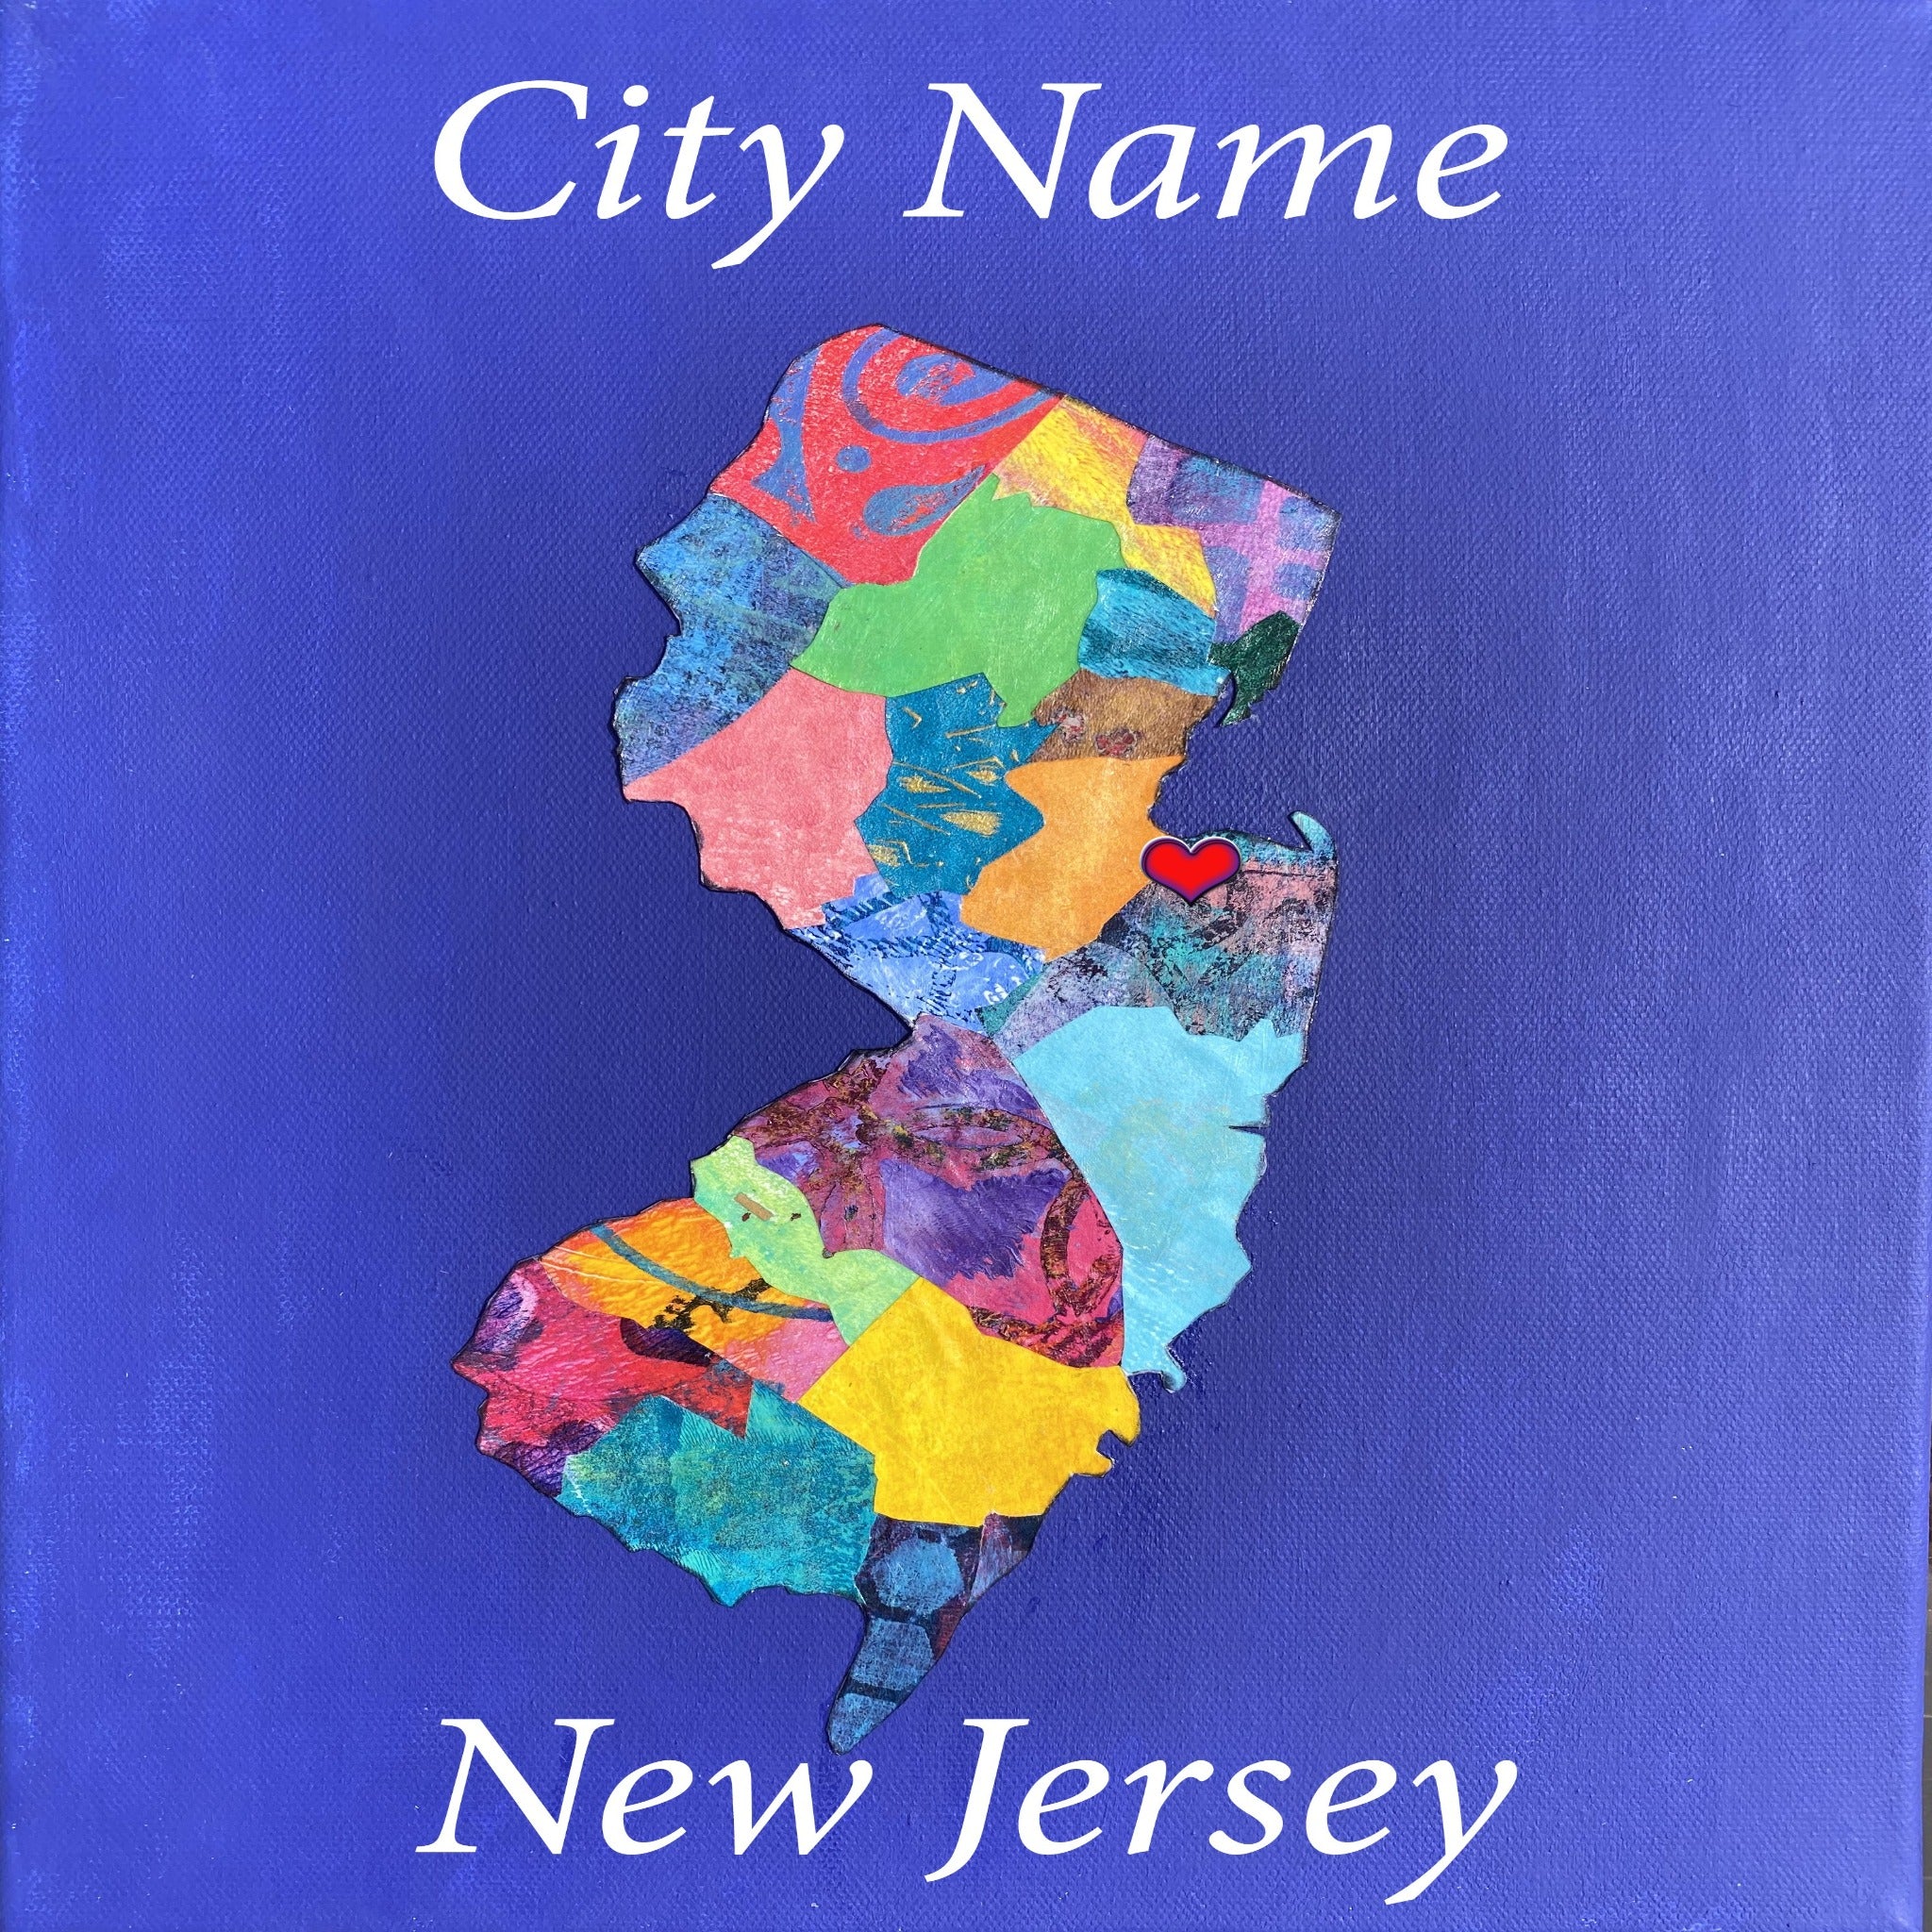 Mixed Media custom print on canvas in 5x7, 8x10, or 11x14 of your favorite New Jersey town.